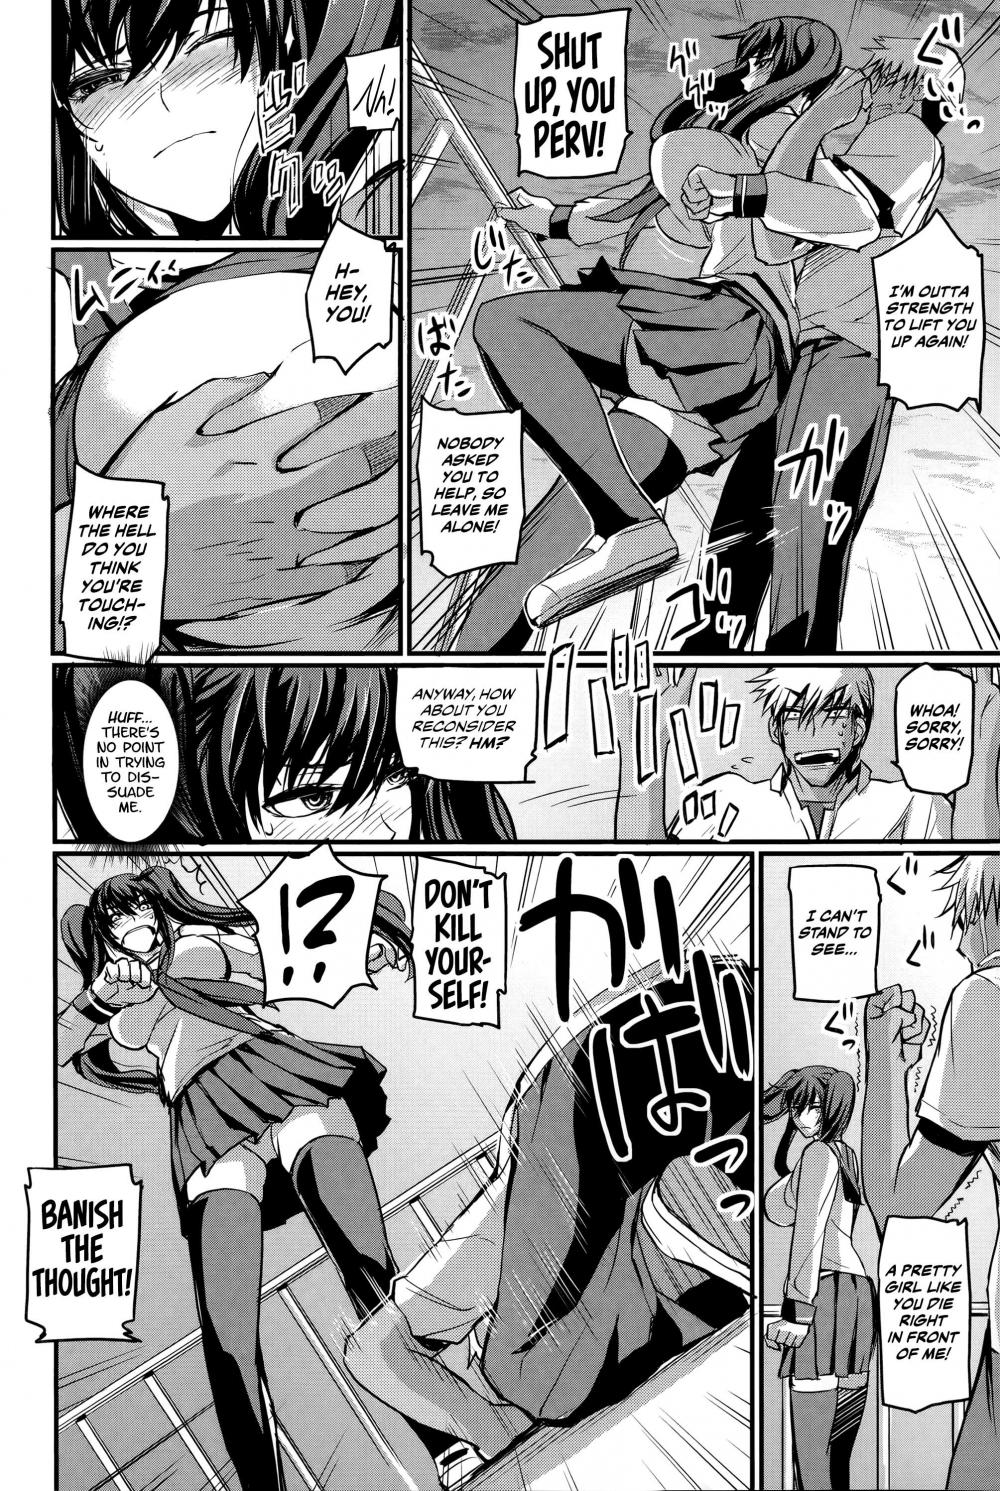 Hentai Manga Comic-How To Stop A Suicide-Read-4